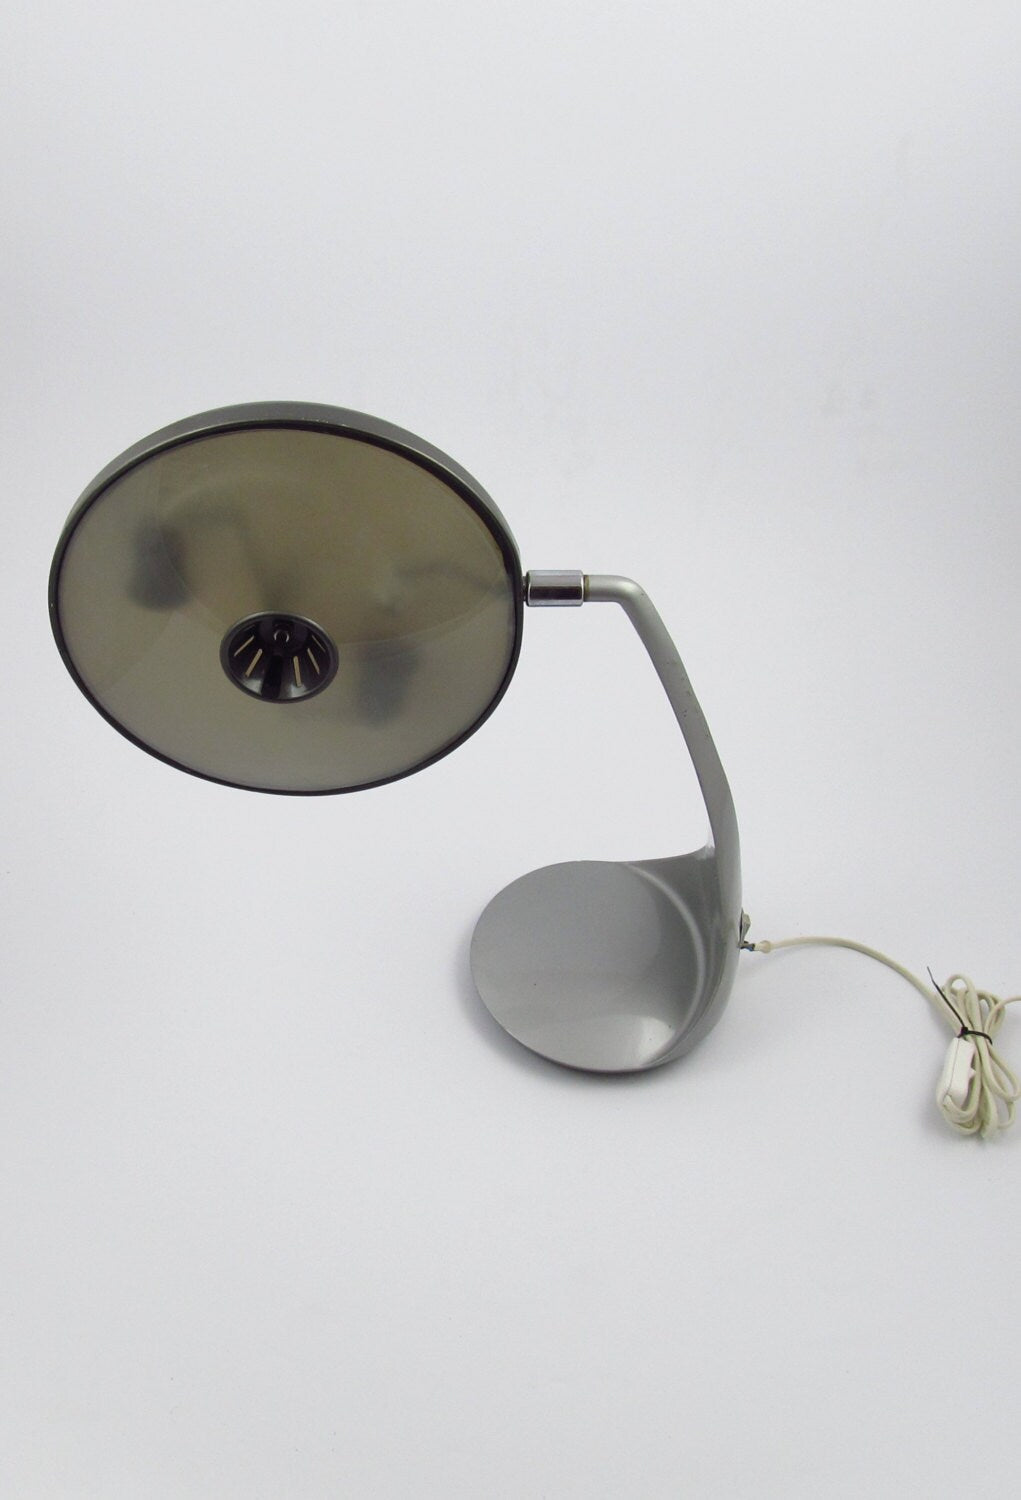 Lupela H37 table lamp Reina or queen, beautiful 1960s style icon.